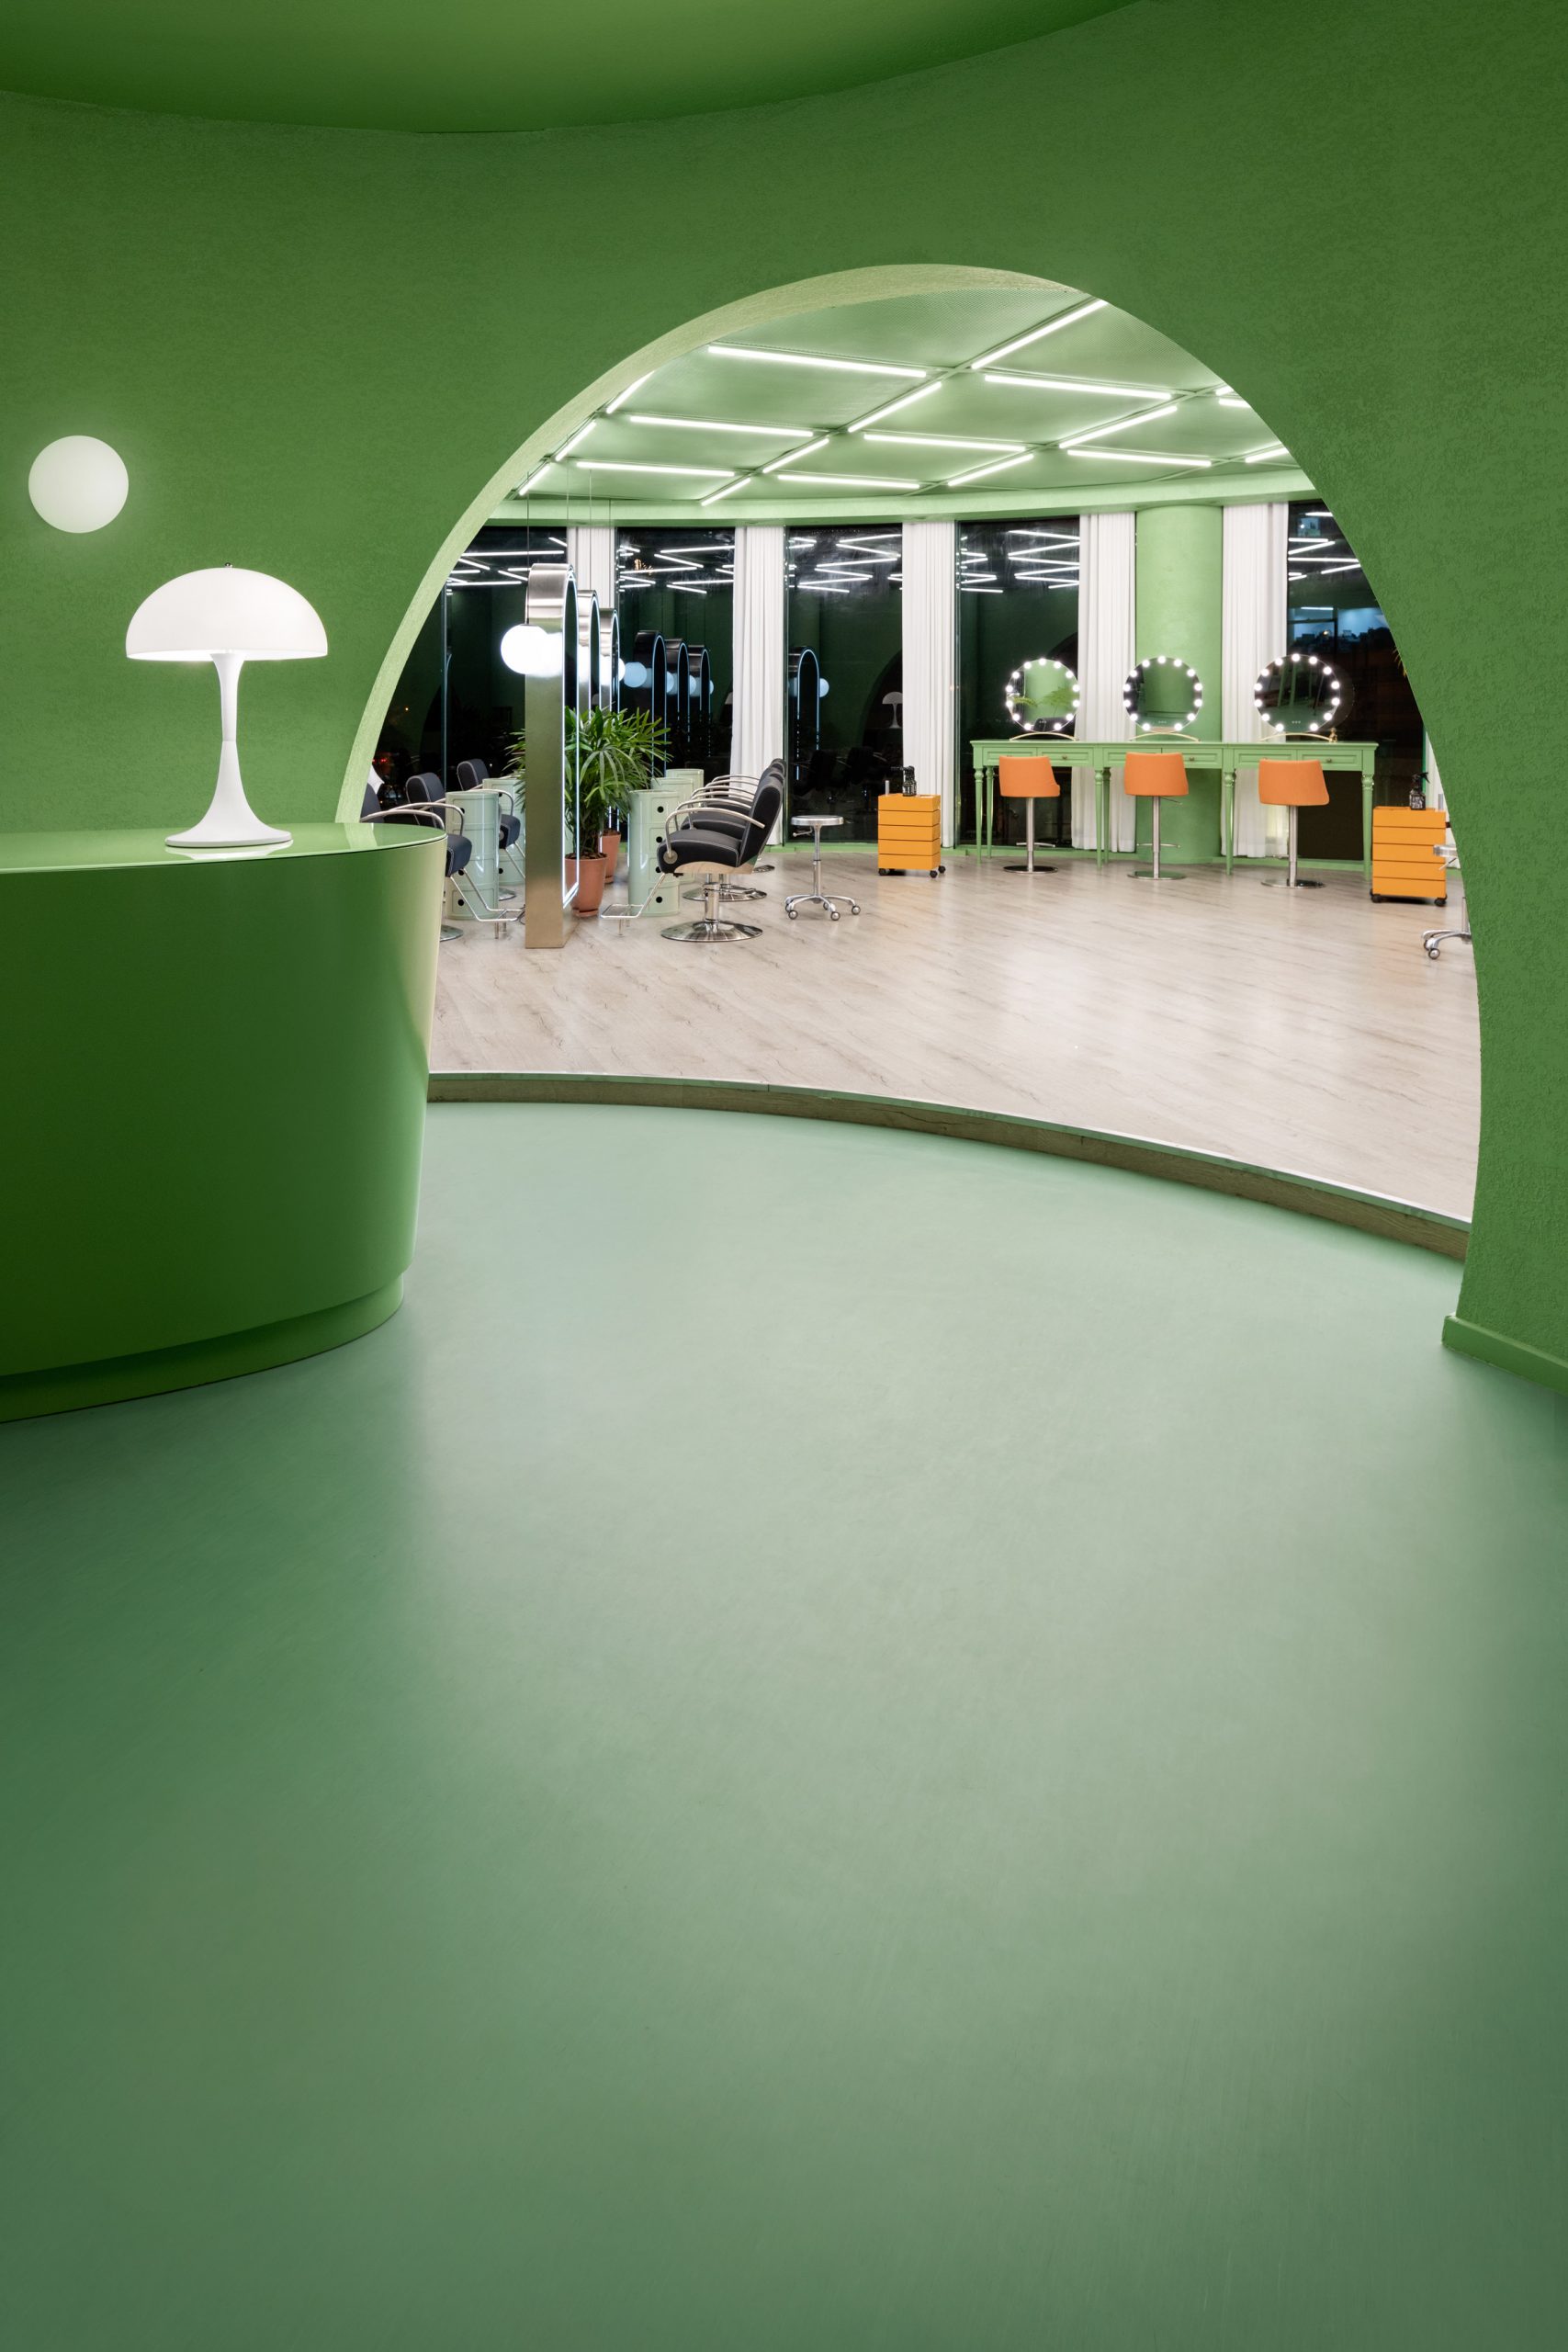 The lobby has a synthetic green floor by IS architecture and design